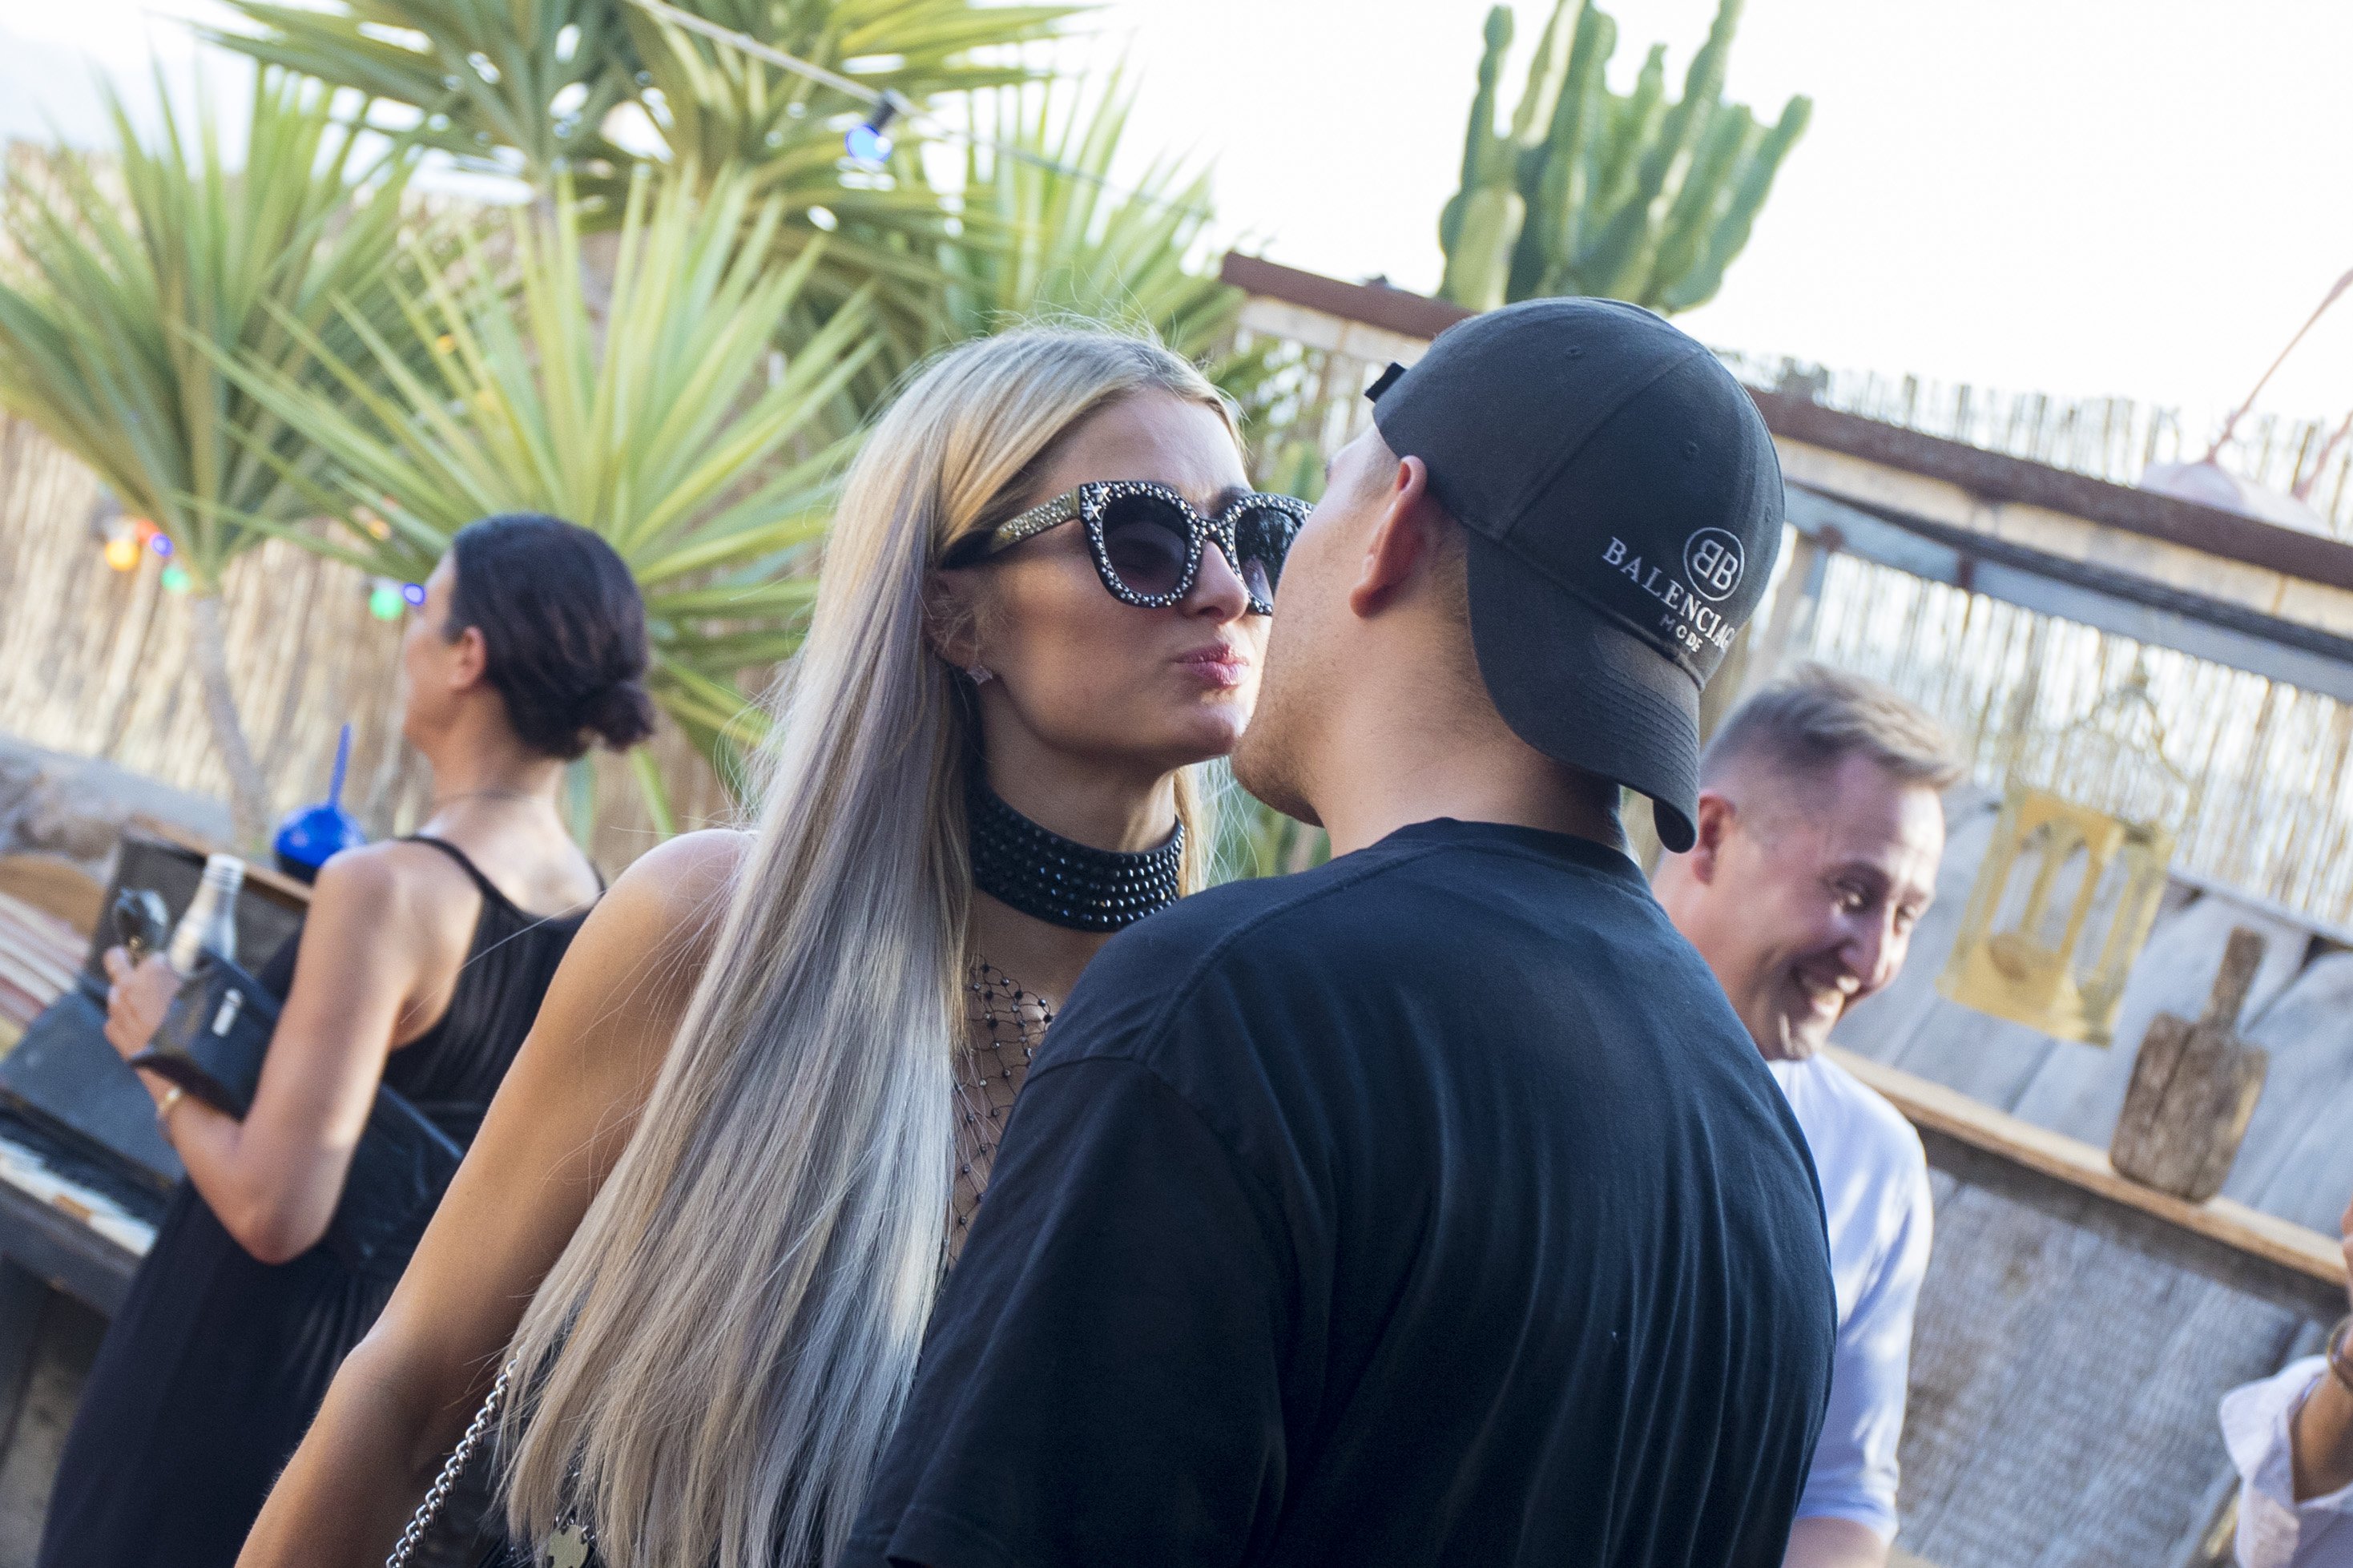 Paris Hilton (L) and Chris Zylka attend his exhibition 'Why Use A Name' in Ibiza on August 9, 2018 in Ibiza, Spain | Source: Getty Images 